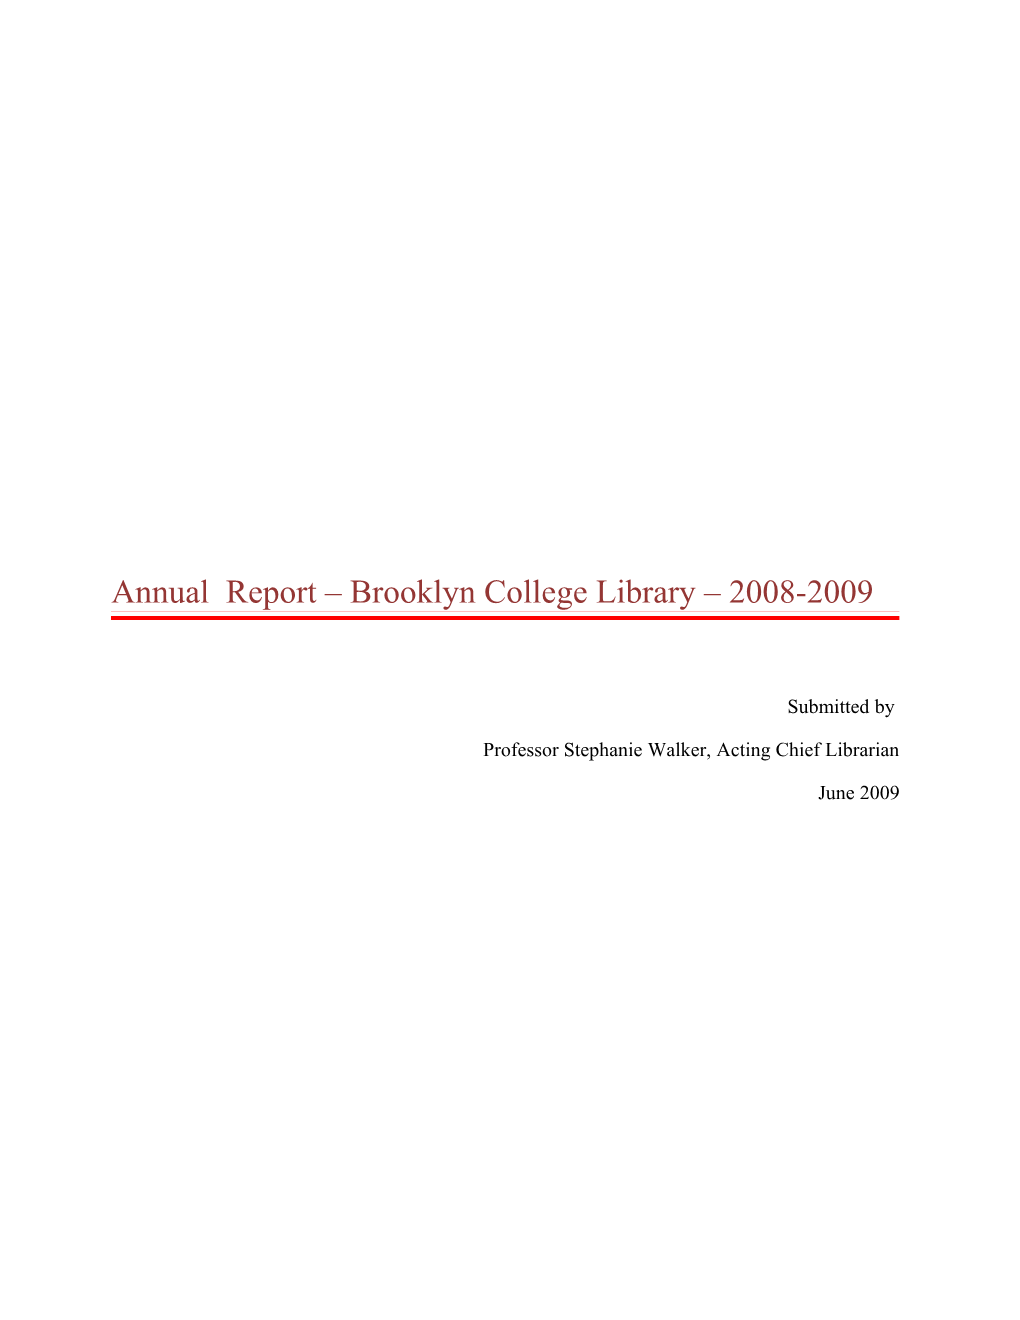 Annual Report Brooklyn College Library 2007-2008